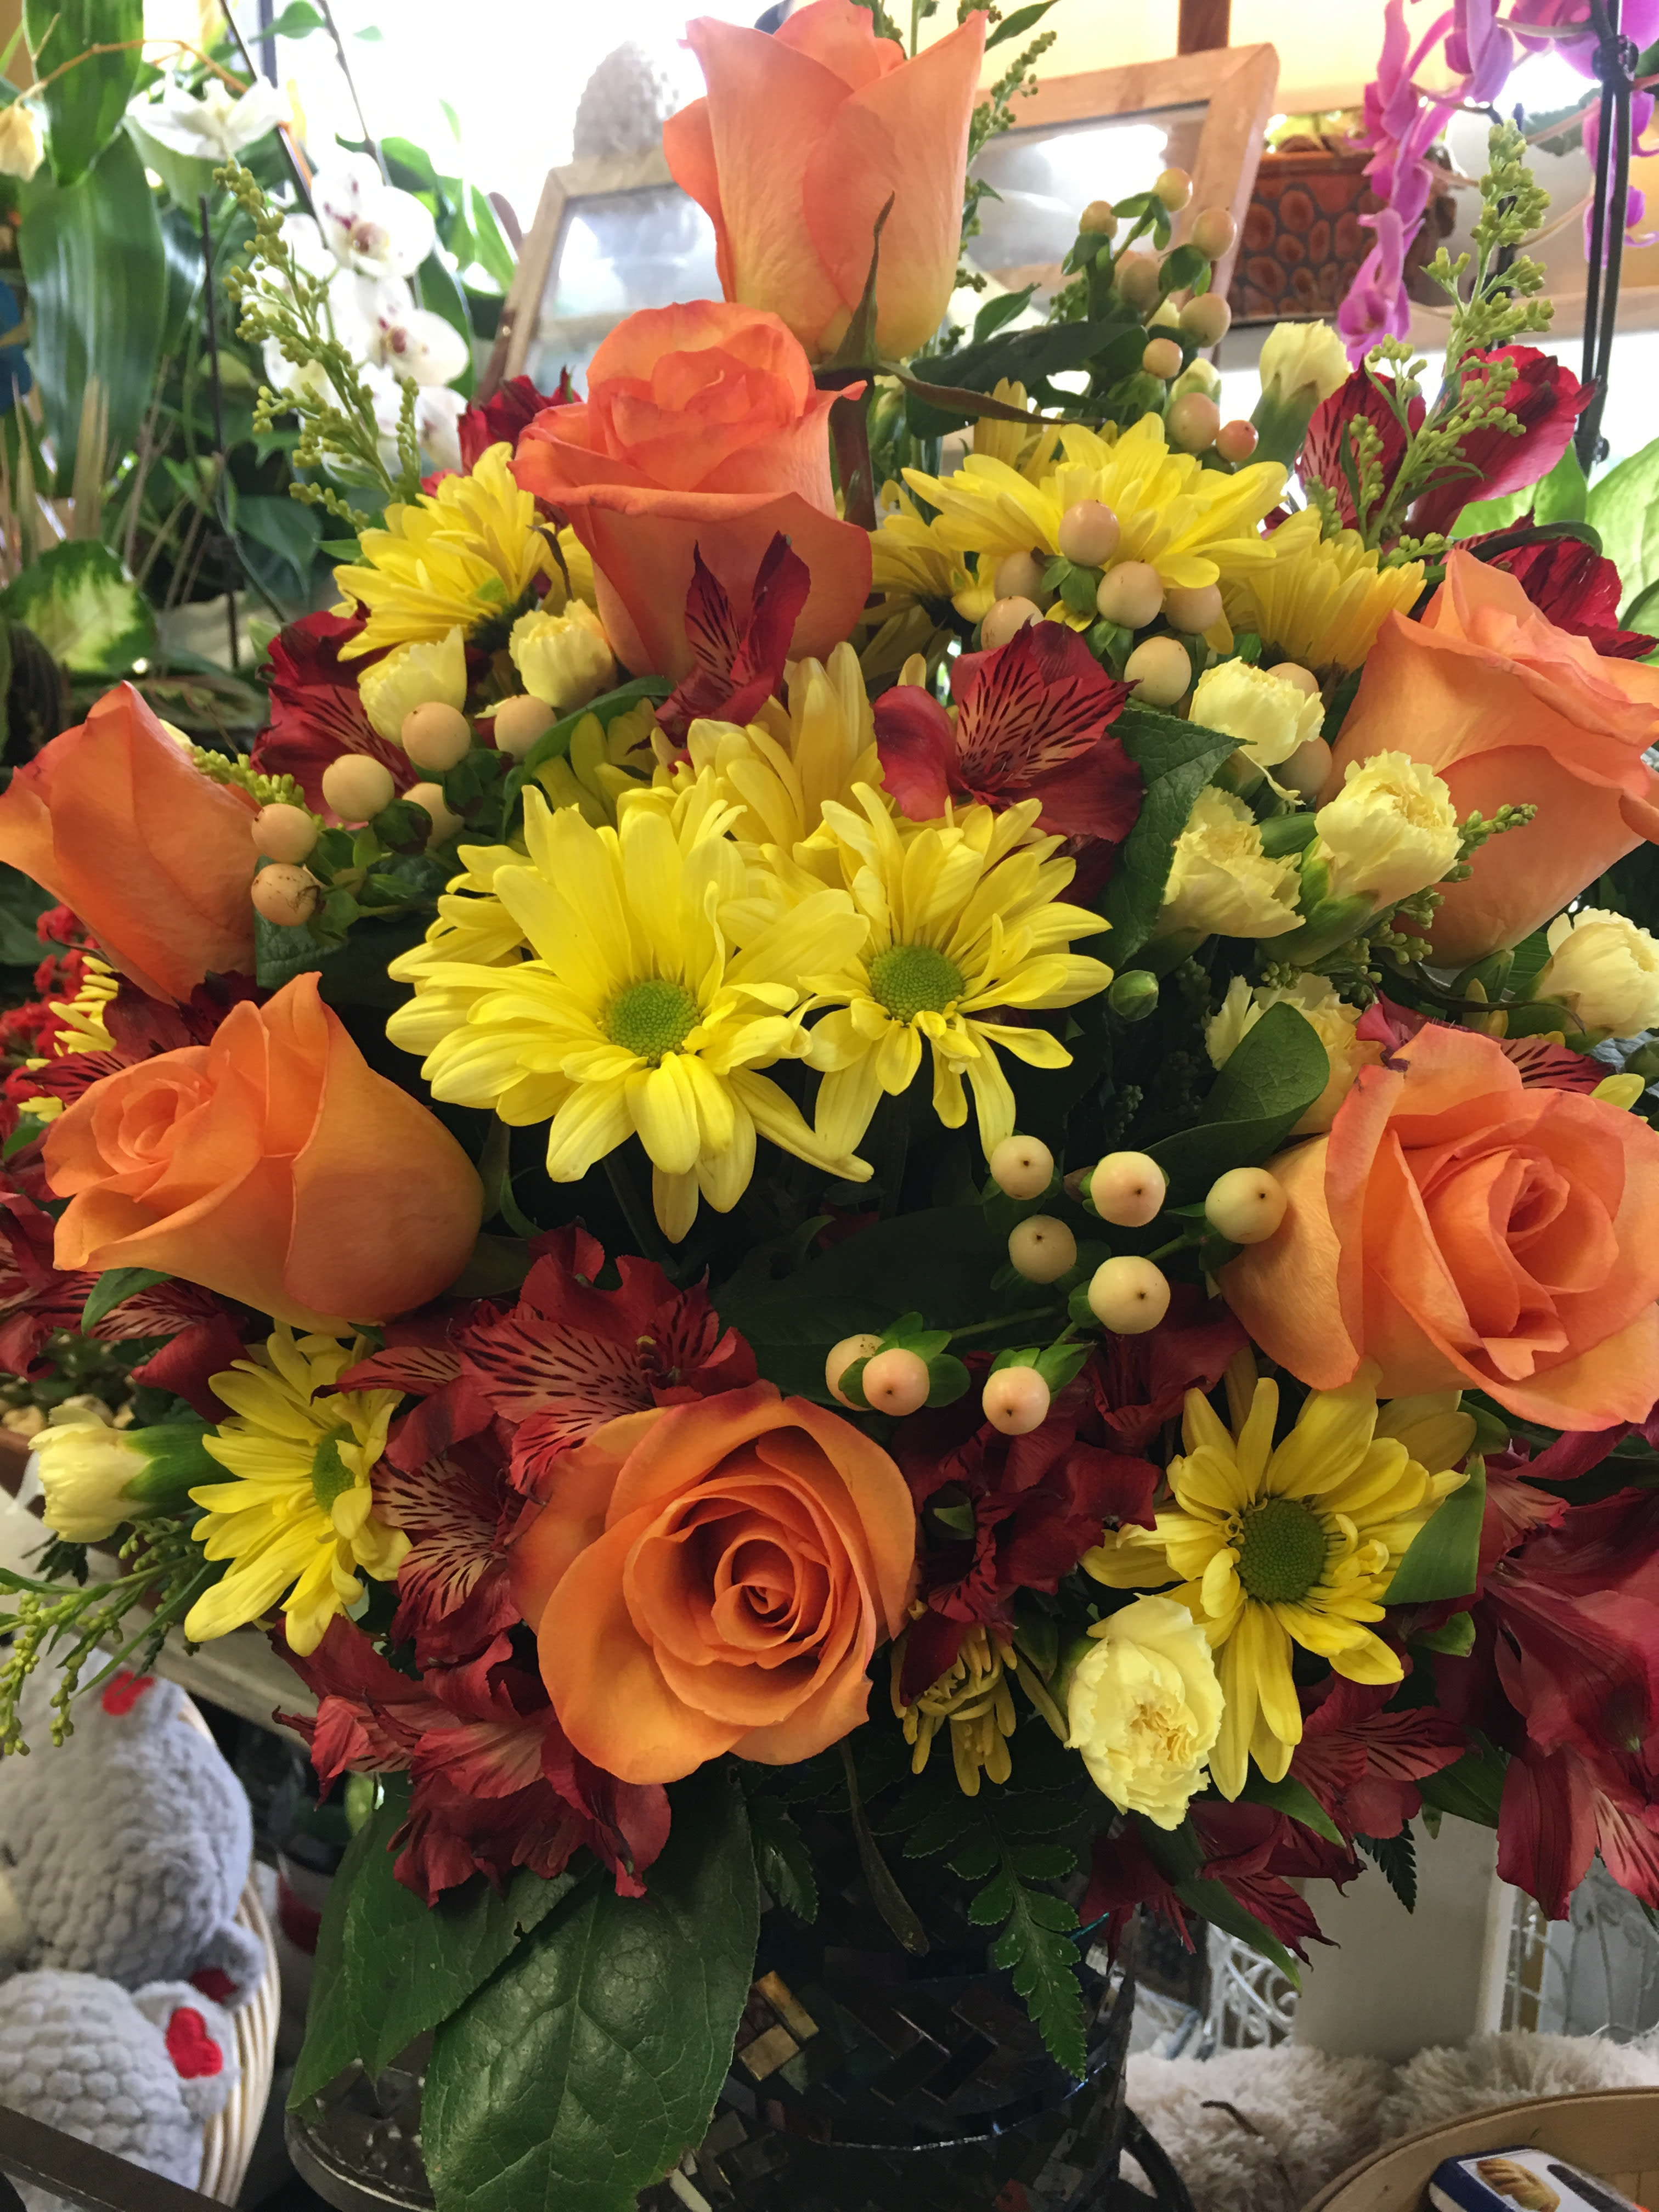 Ooh la la - Make a special day even more memorable with this bright, beautiful gift. Radiant orange roses and bright yellow daisies burst with happiness from one of our many unique containers.